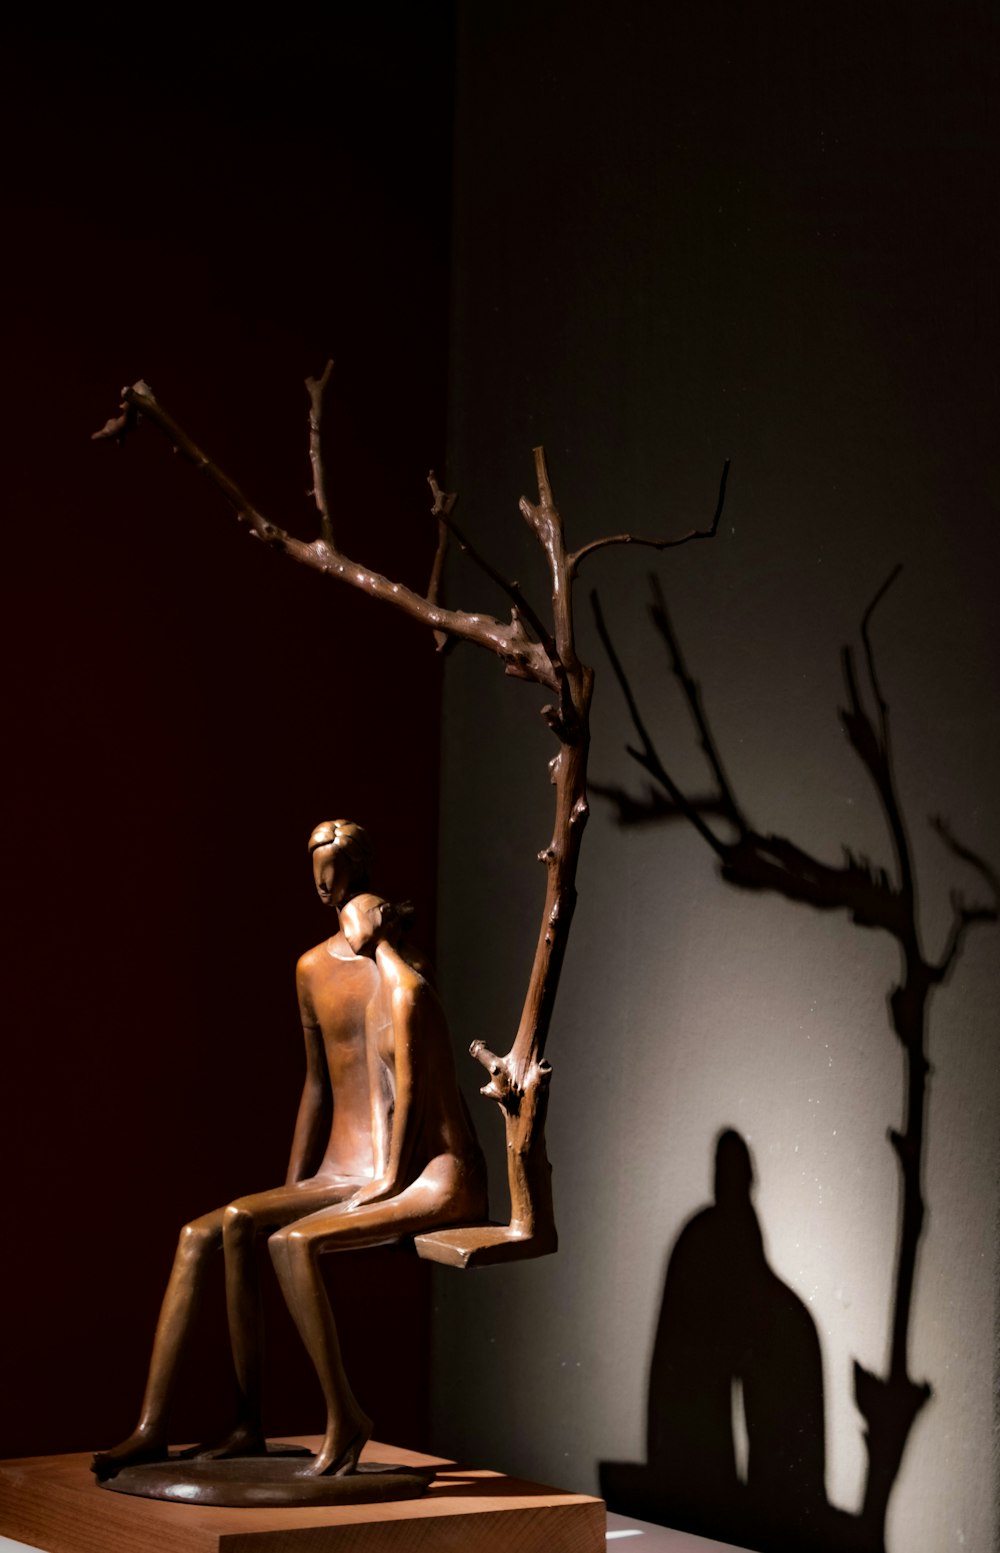 a sculpture of a man sitting on a chair next to a tree